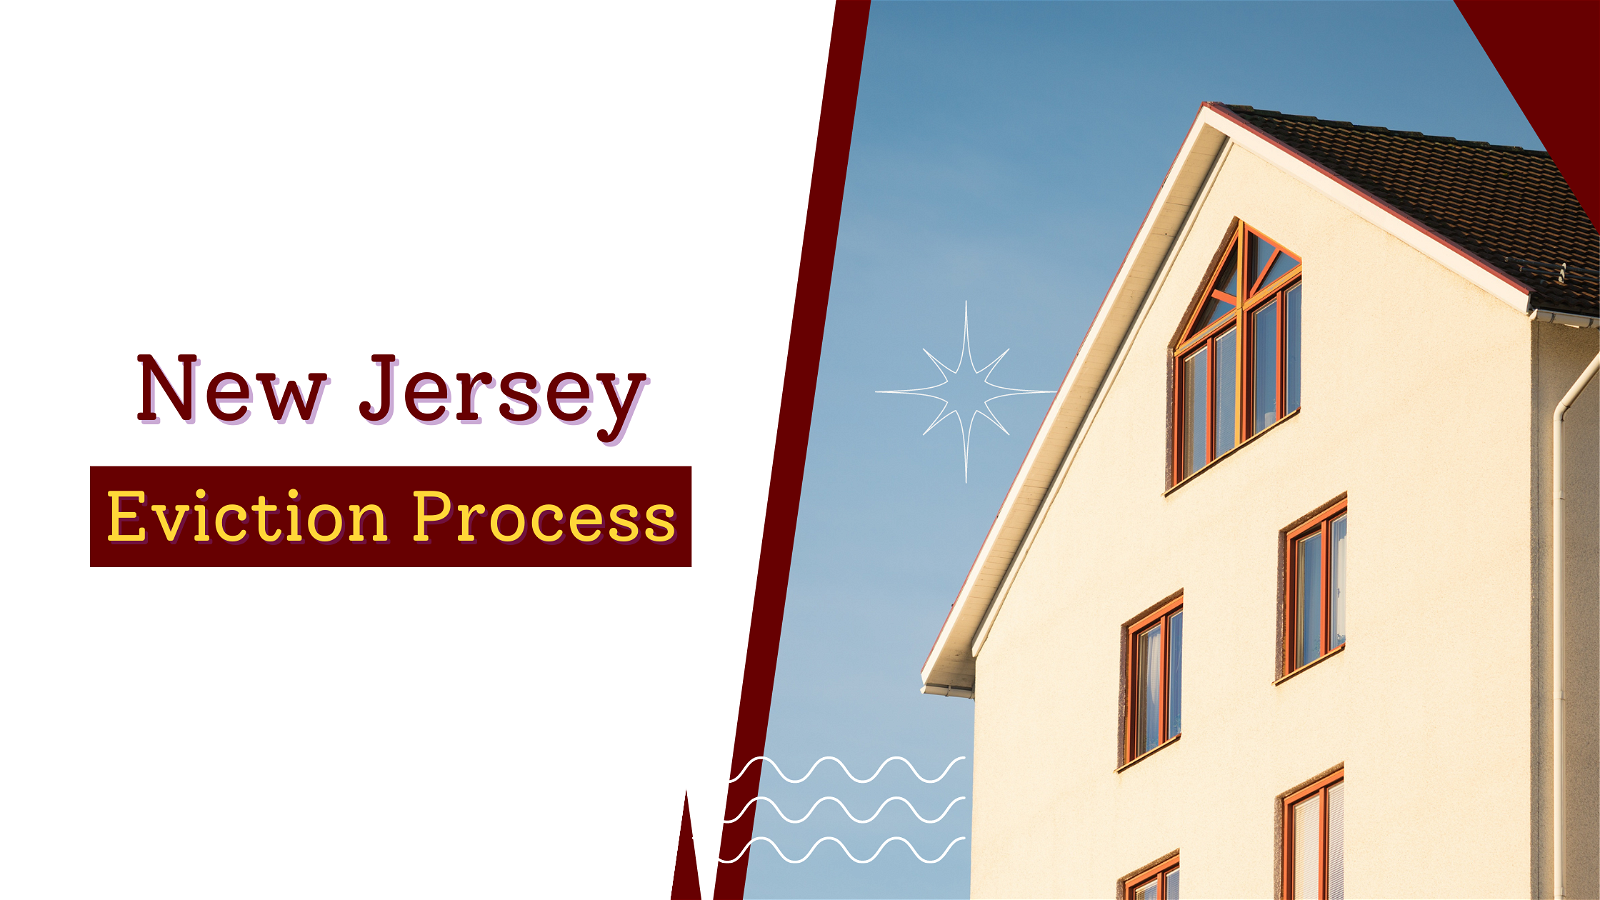 New Jersey Eviction Process